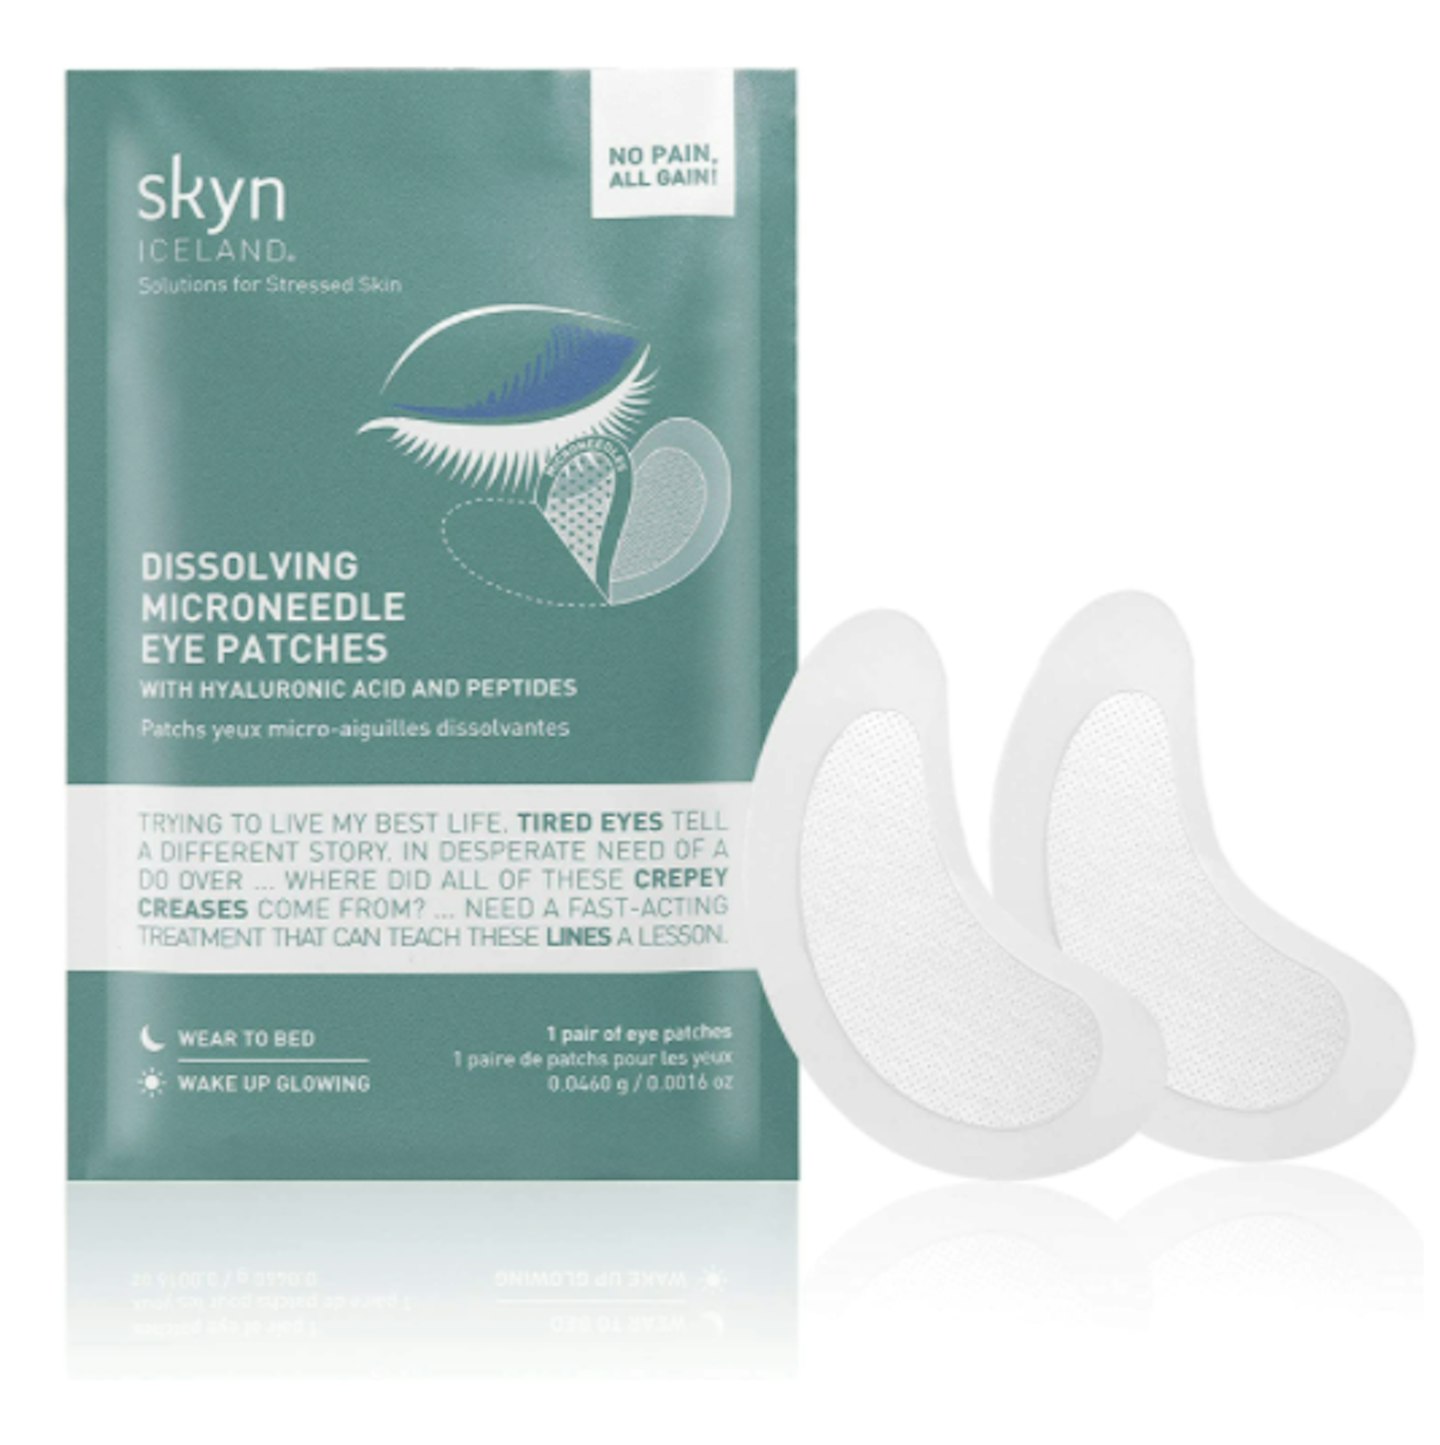 Skyn Iceland Dissolving Microneedle Eye Patches